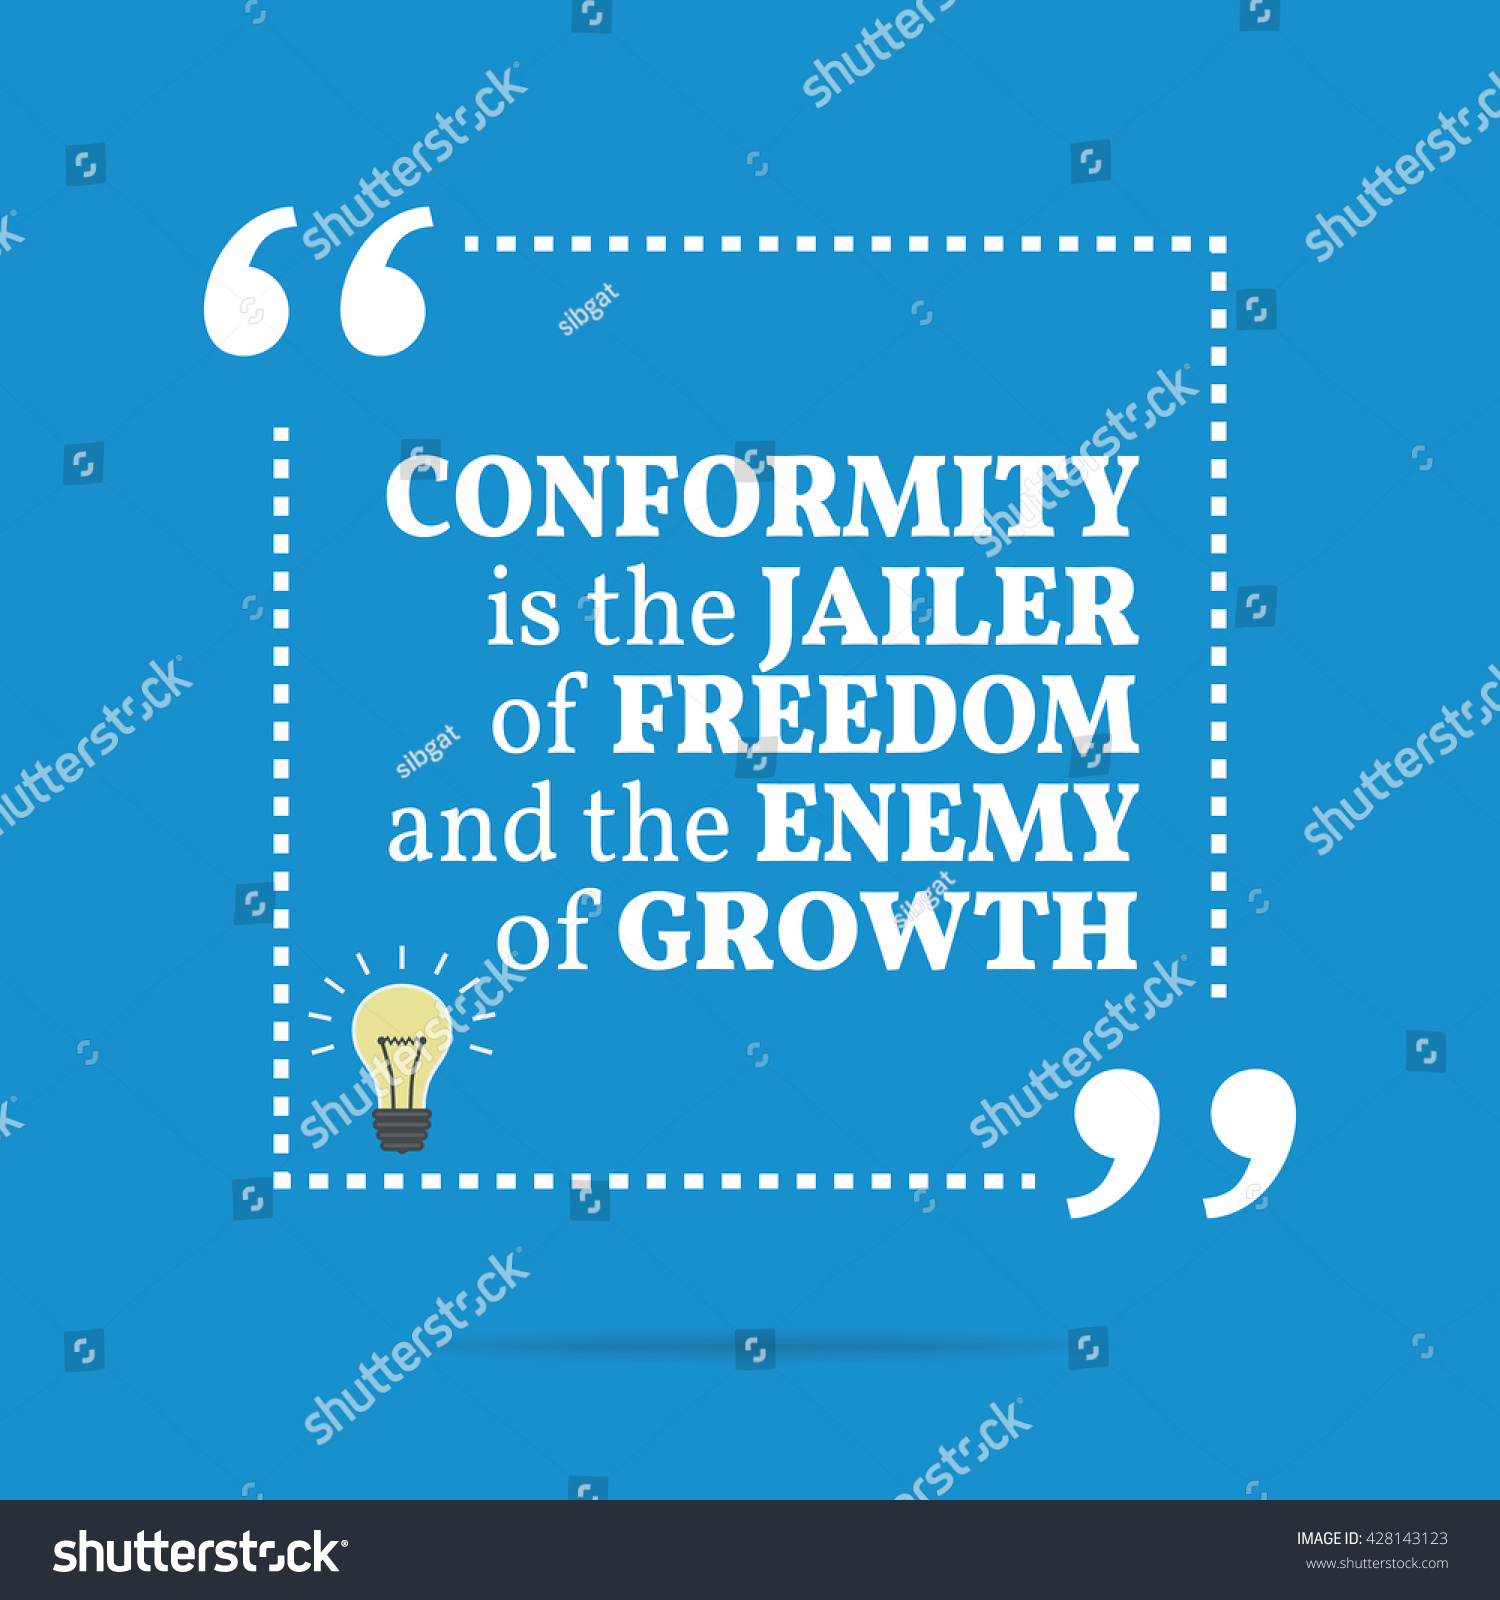 Conformity is the jailer of freedom